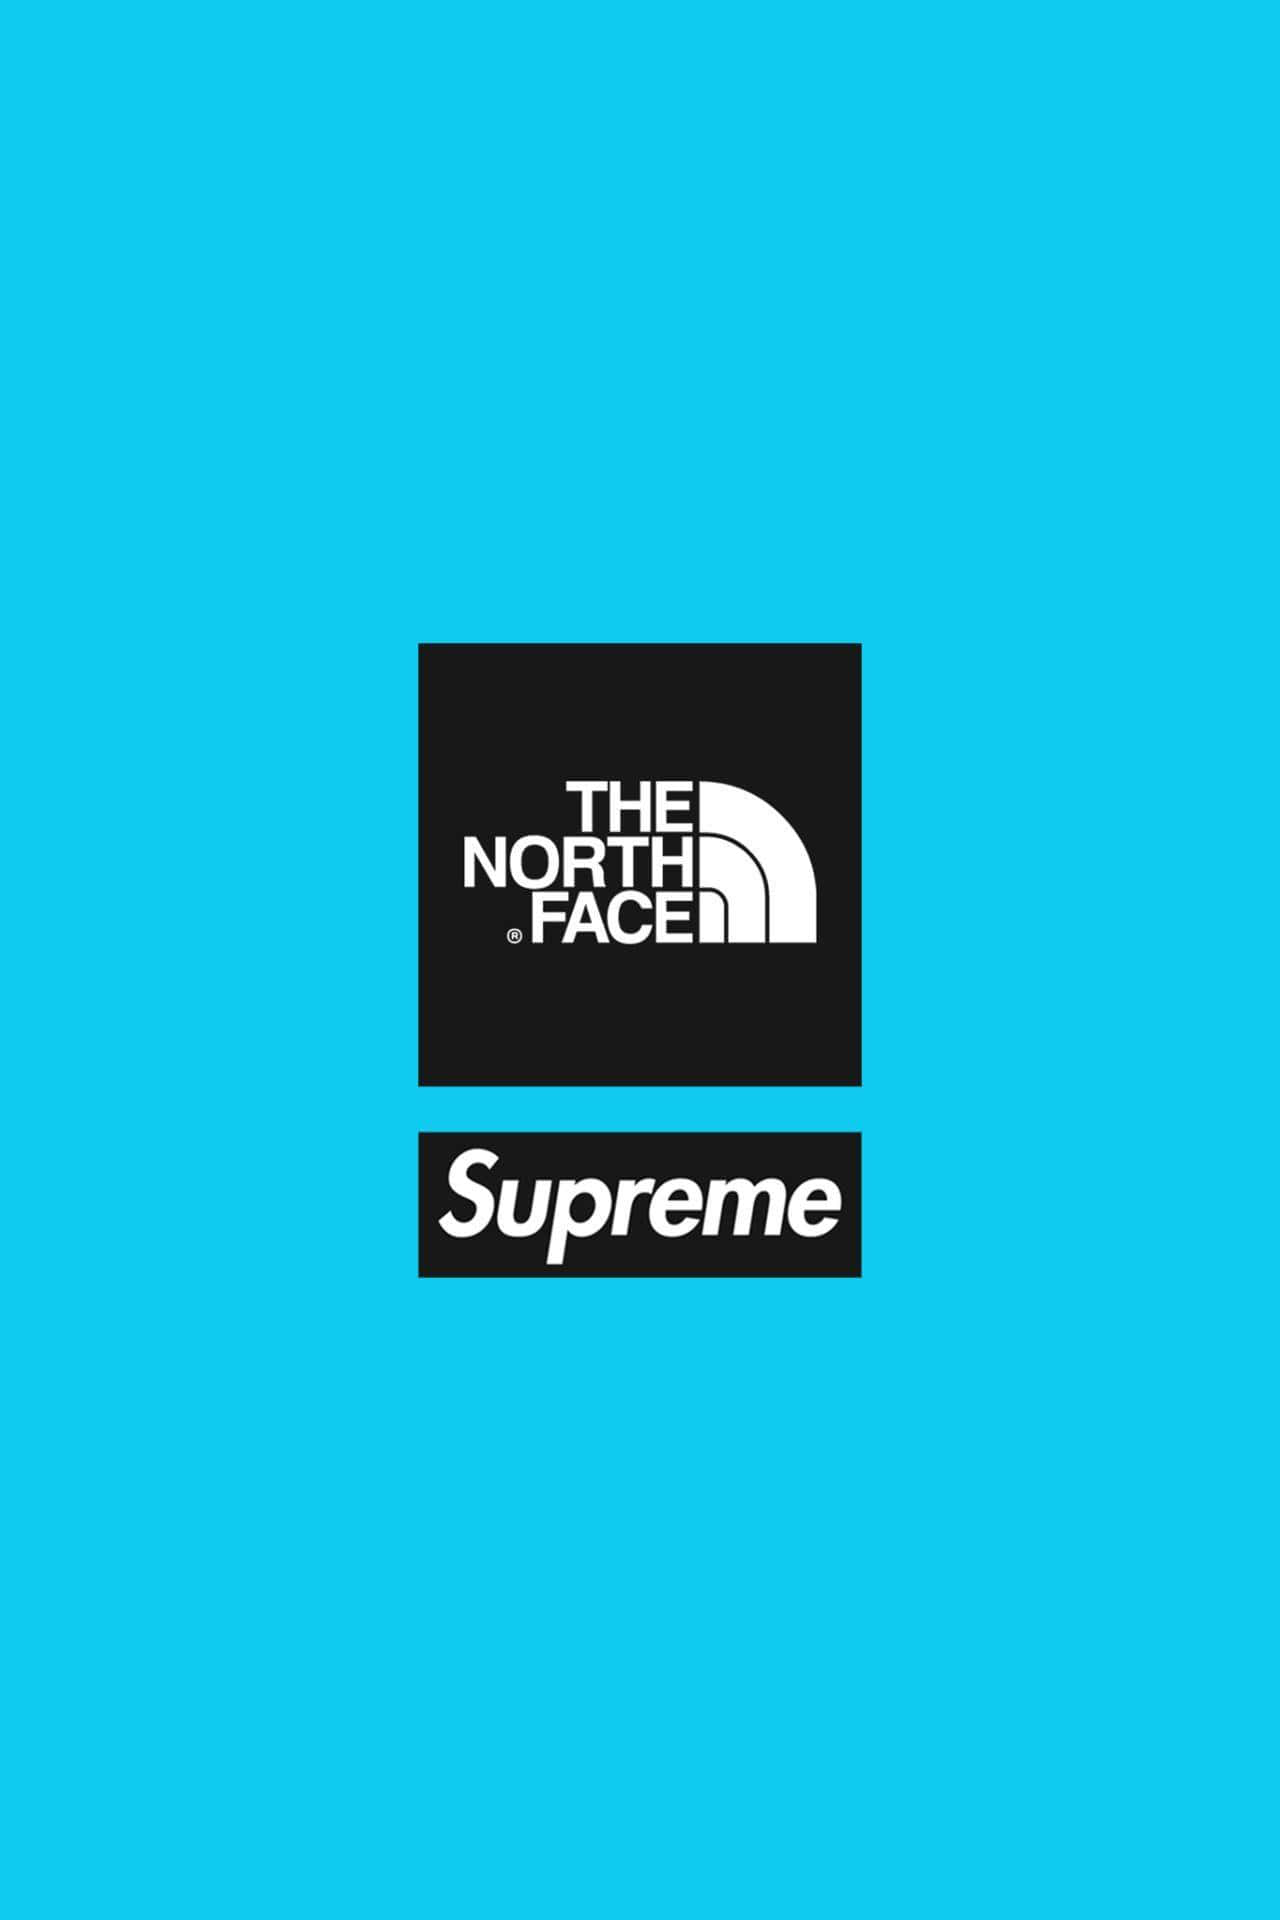 The North Face Logo On A Blue Background Wallpaper